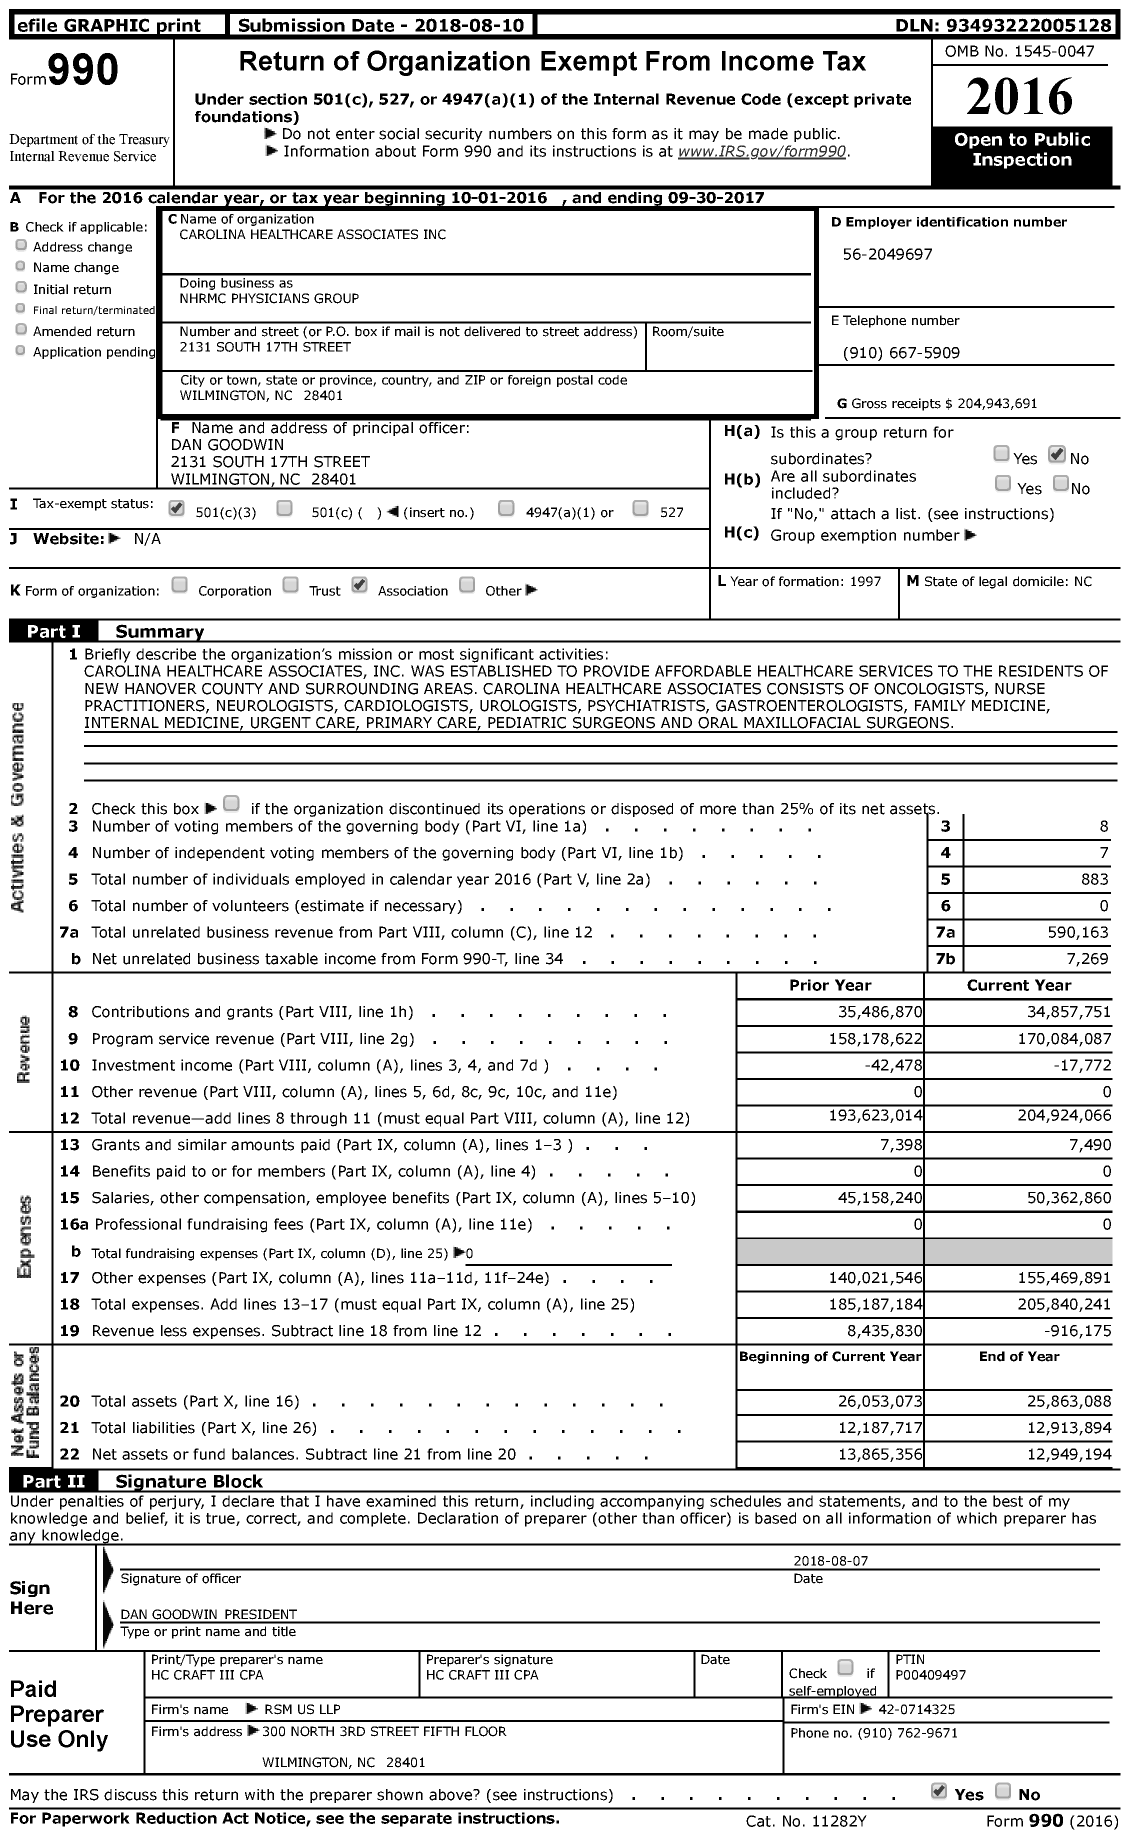 Image of first page of 2016 Form 990 for NHRMC Physicians Group